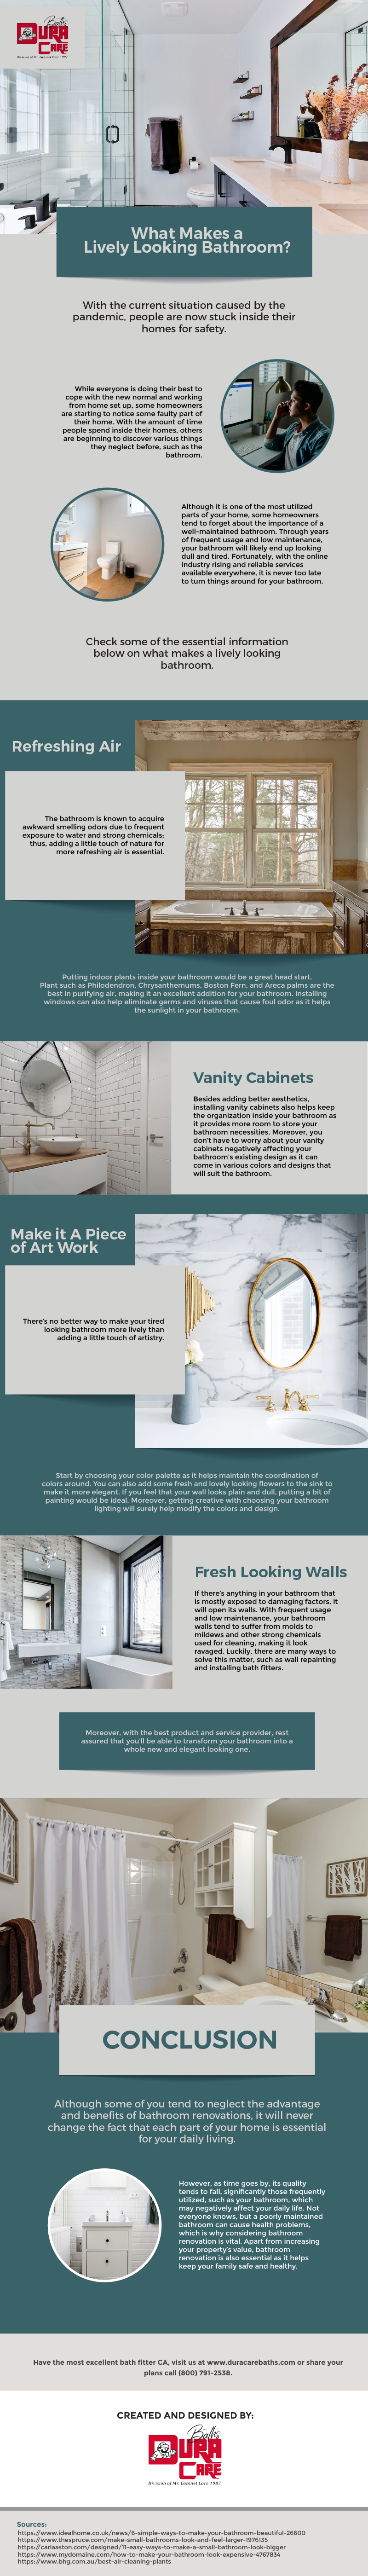 What Makes a Lively Looking Bathroom Infographic